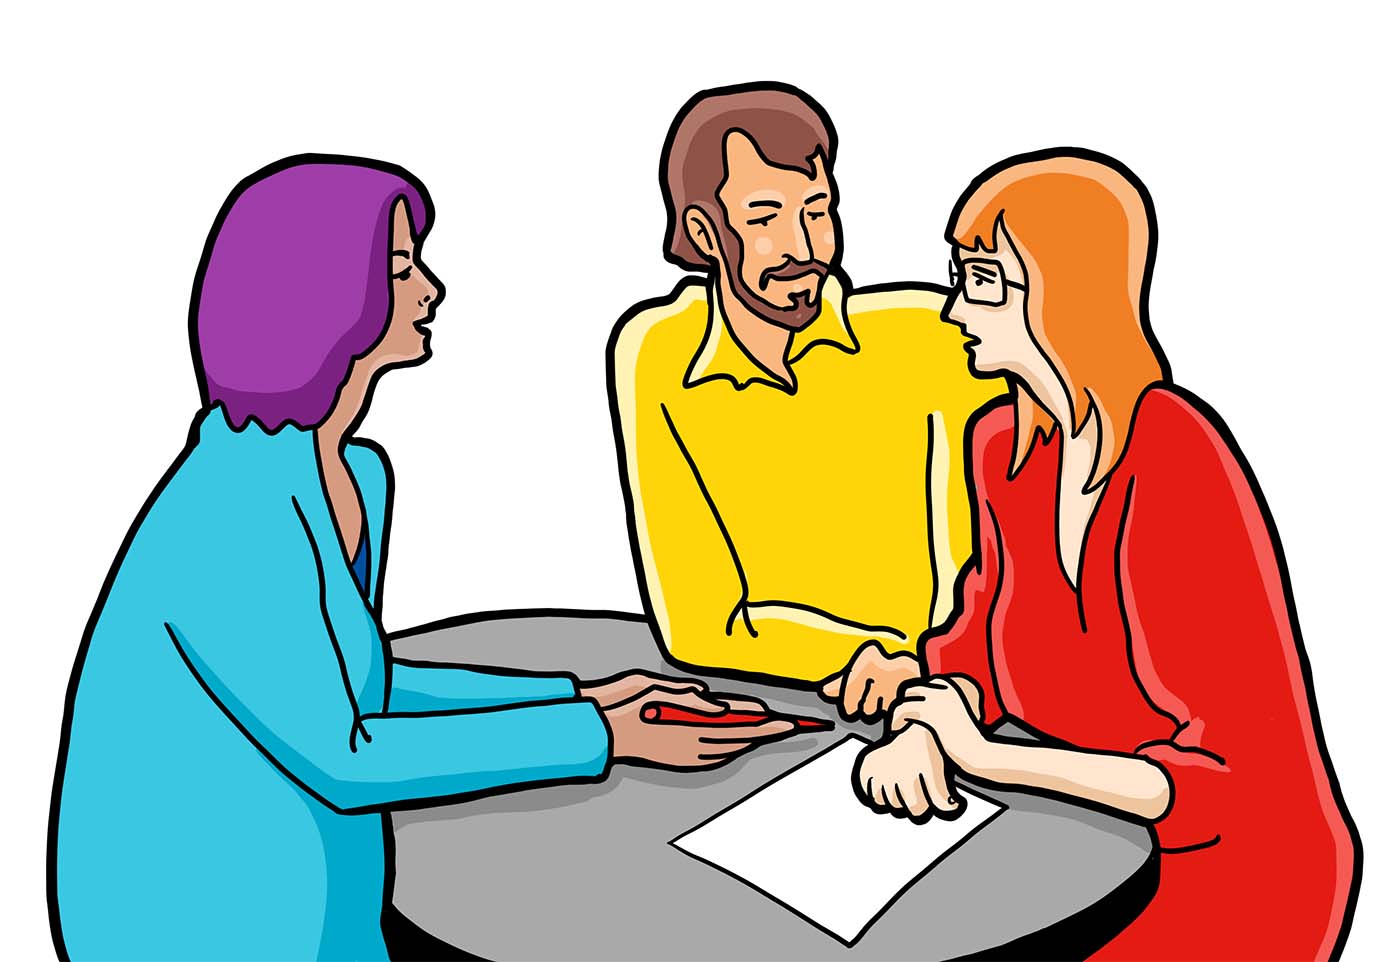 An illustration of a man and a woman sitting at a table and receiving advice from a woman.